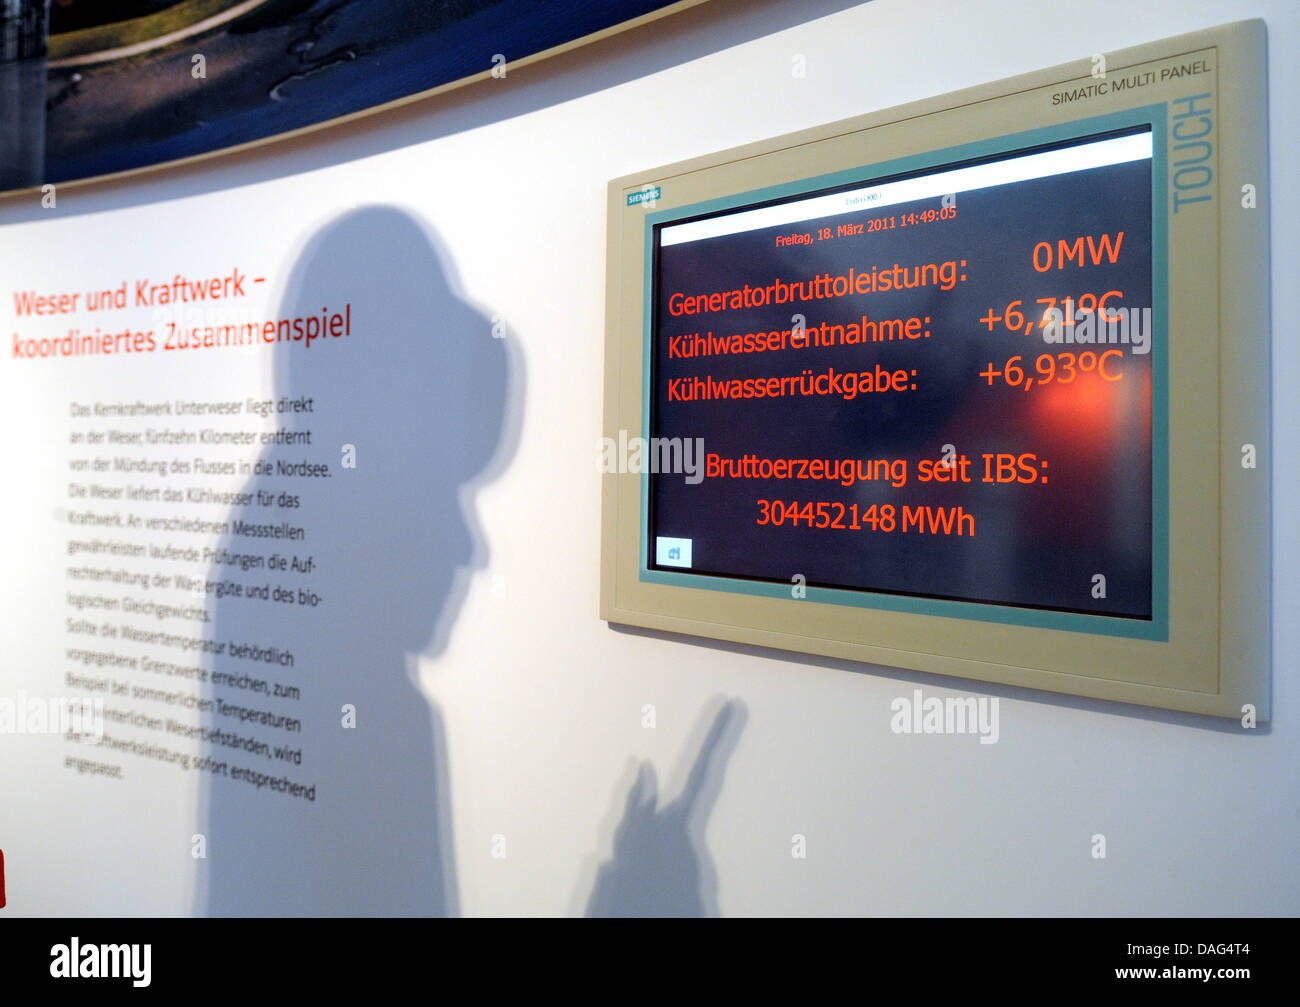 An engineer of energy company e.on points to the energy display in the communication center of the nuclear power station Unterweser in Esensham, Germany, 18 March 2011. The display shows that the general gross outpout is at zero megawatts, and that the temperature difference between the heat exchange water that is taken in and coming out of the reactor is very small. Lower Saxony's Stock Photo